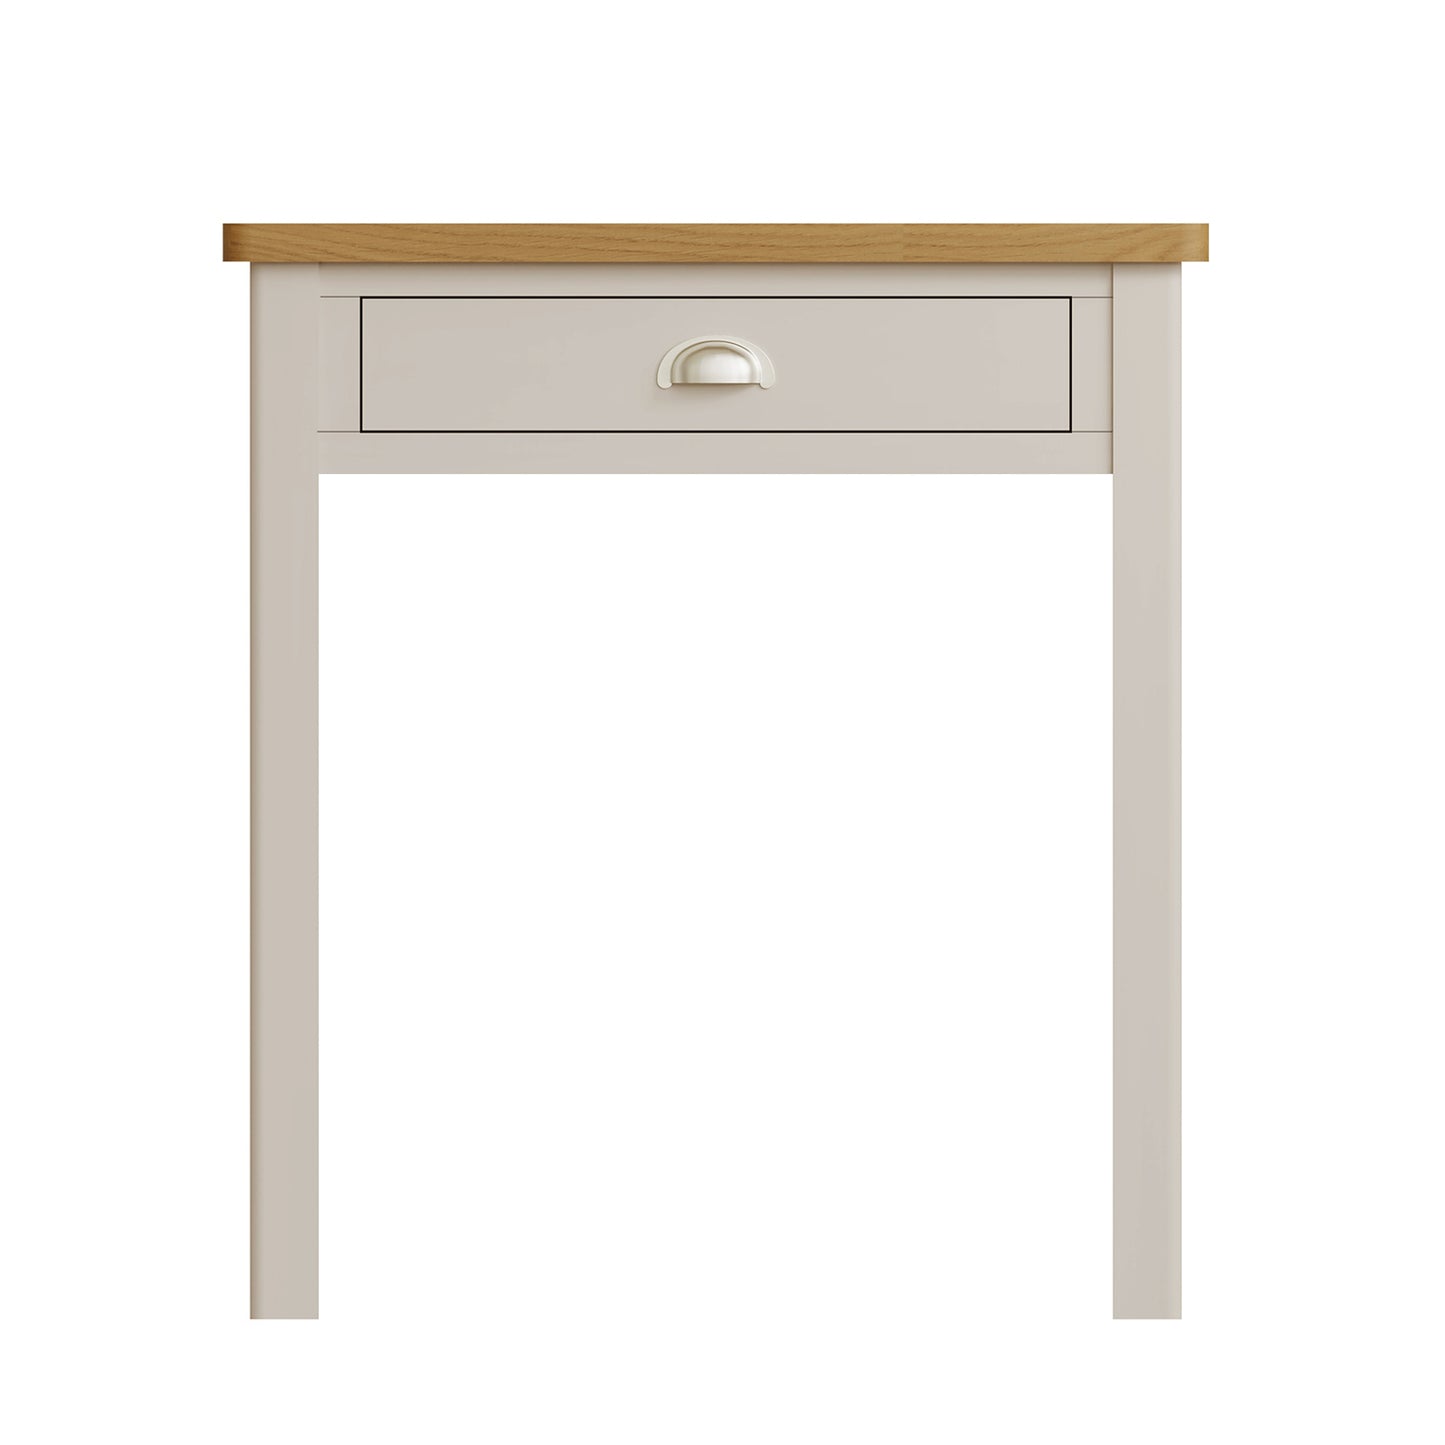 Pershore Painted Dressing Table